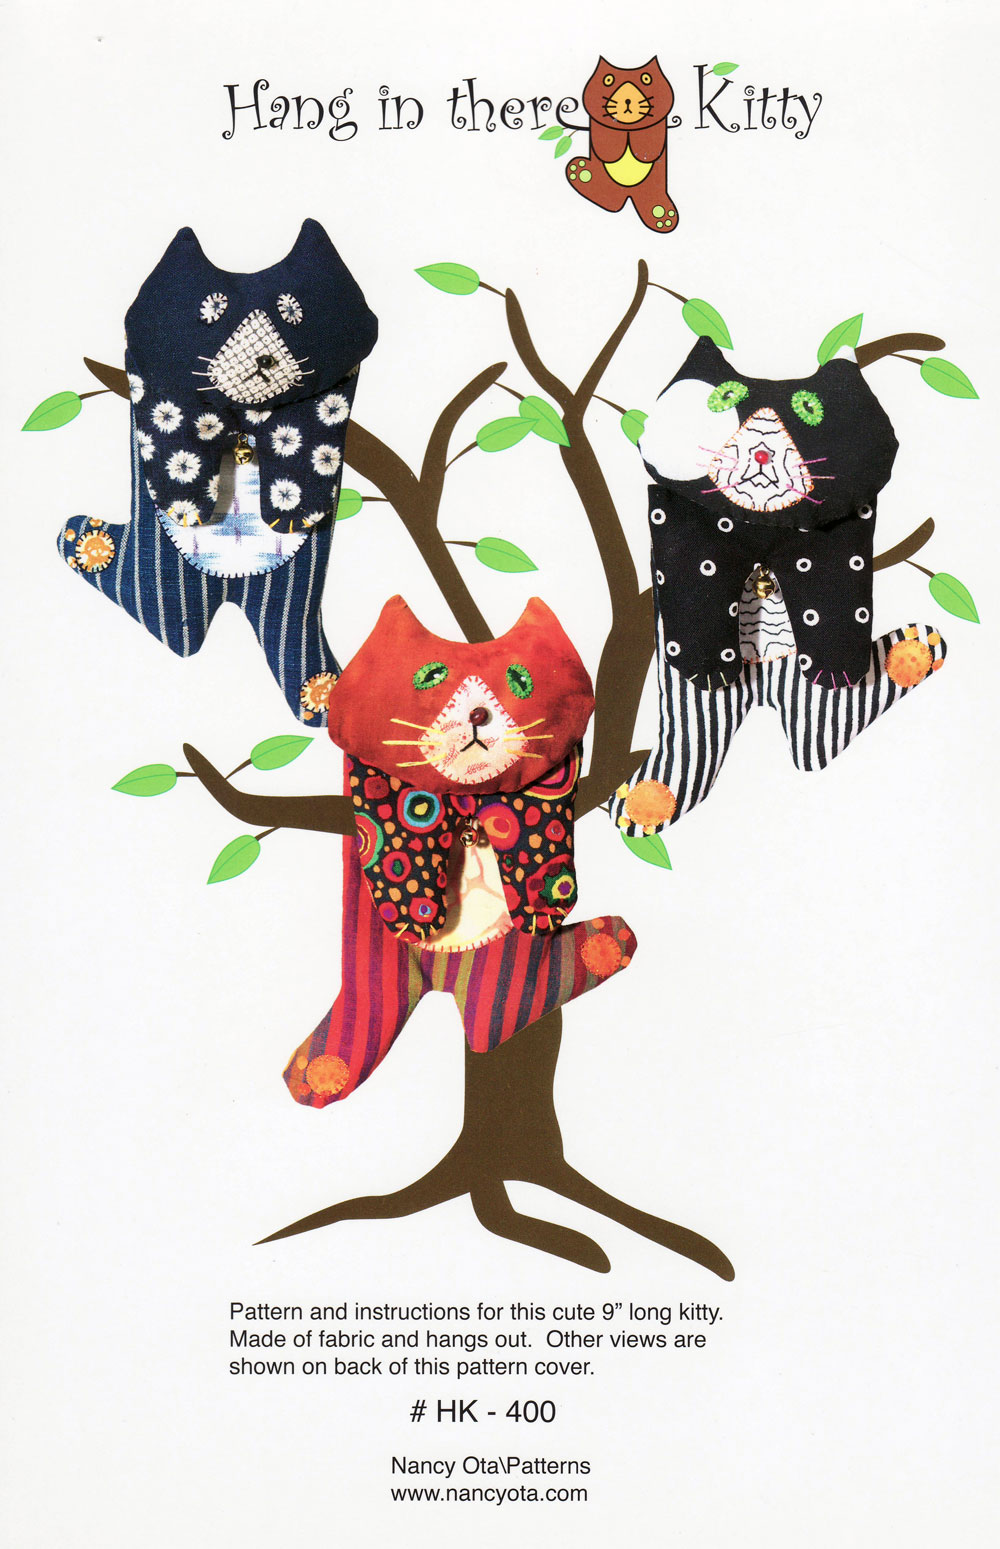 Hang-In-There-Kitty-sewing-pattern-nancy-ota-front